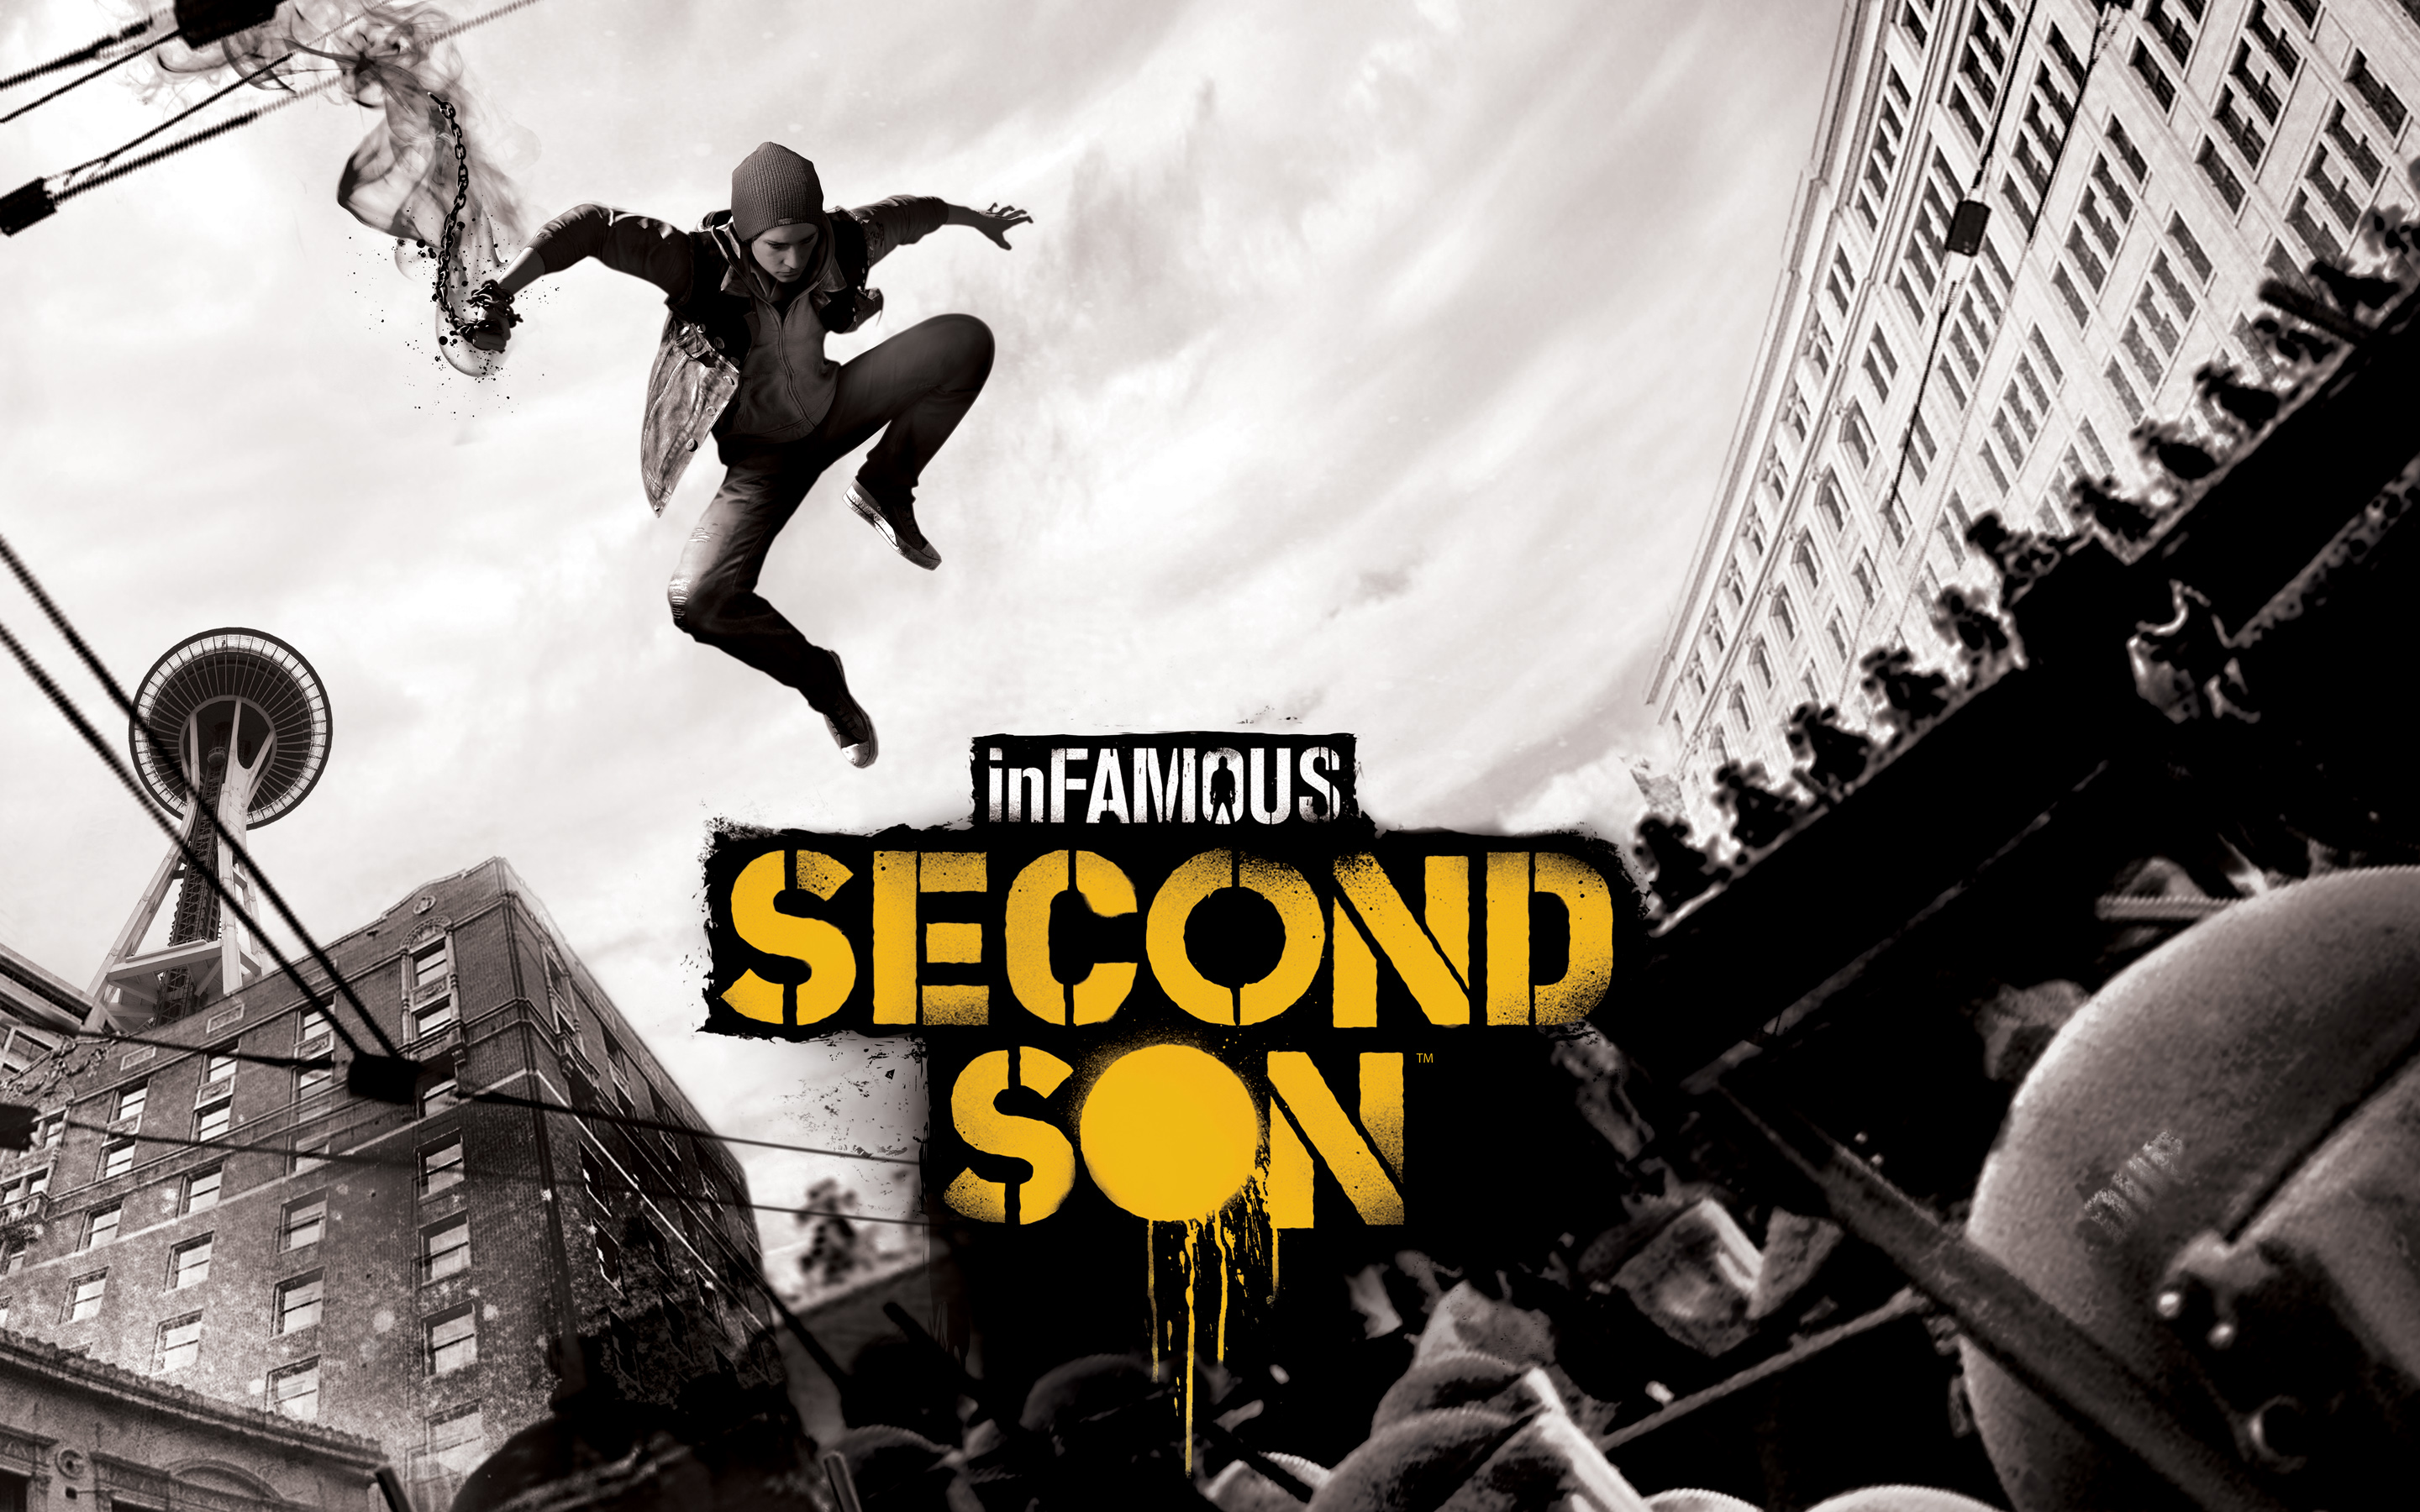 Infamous second son game